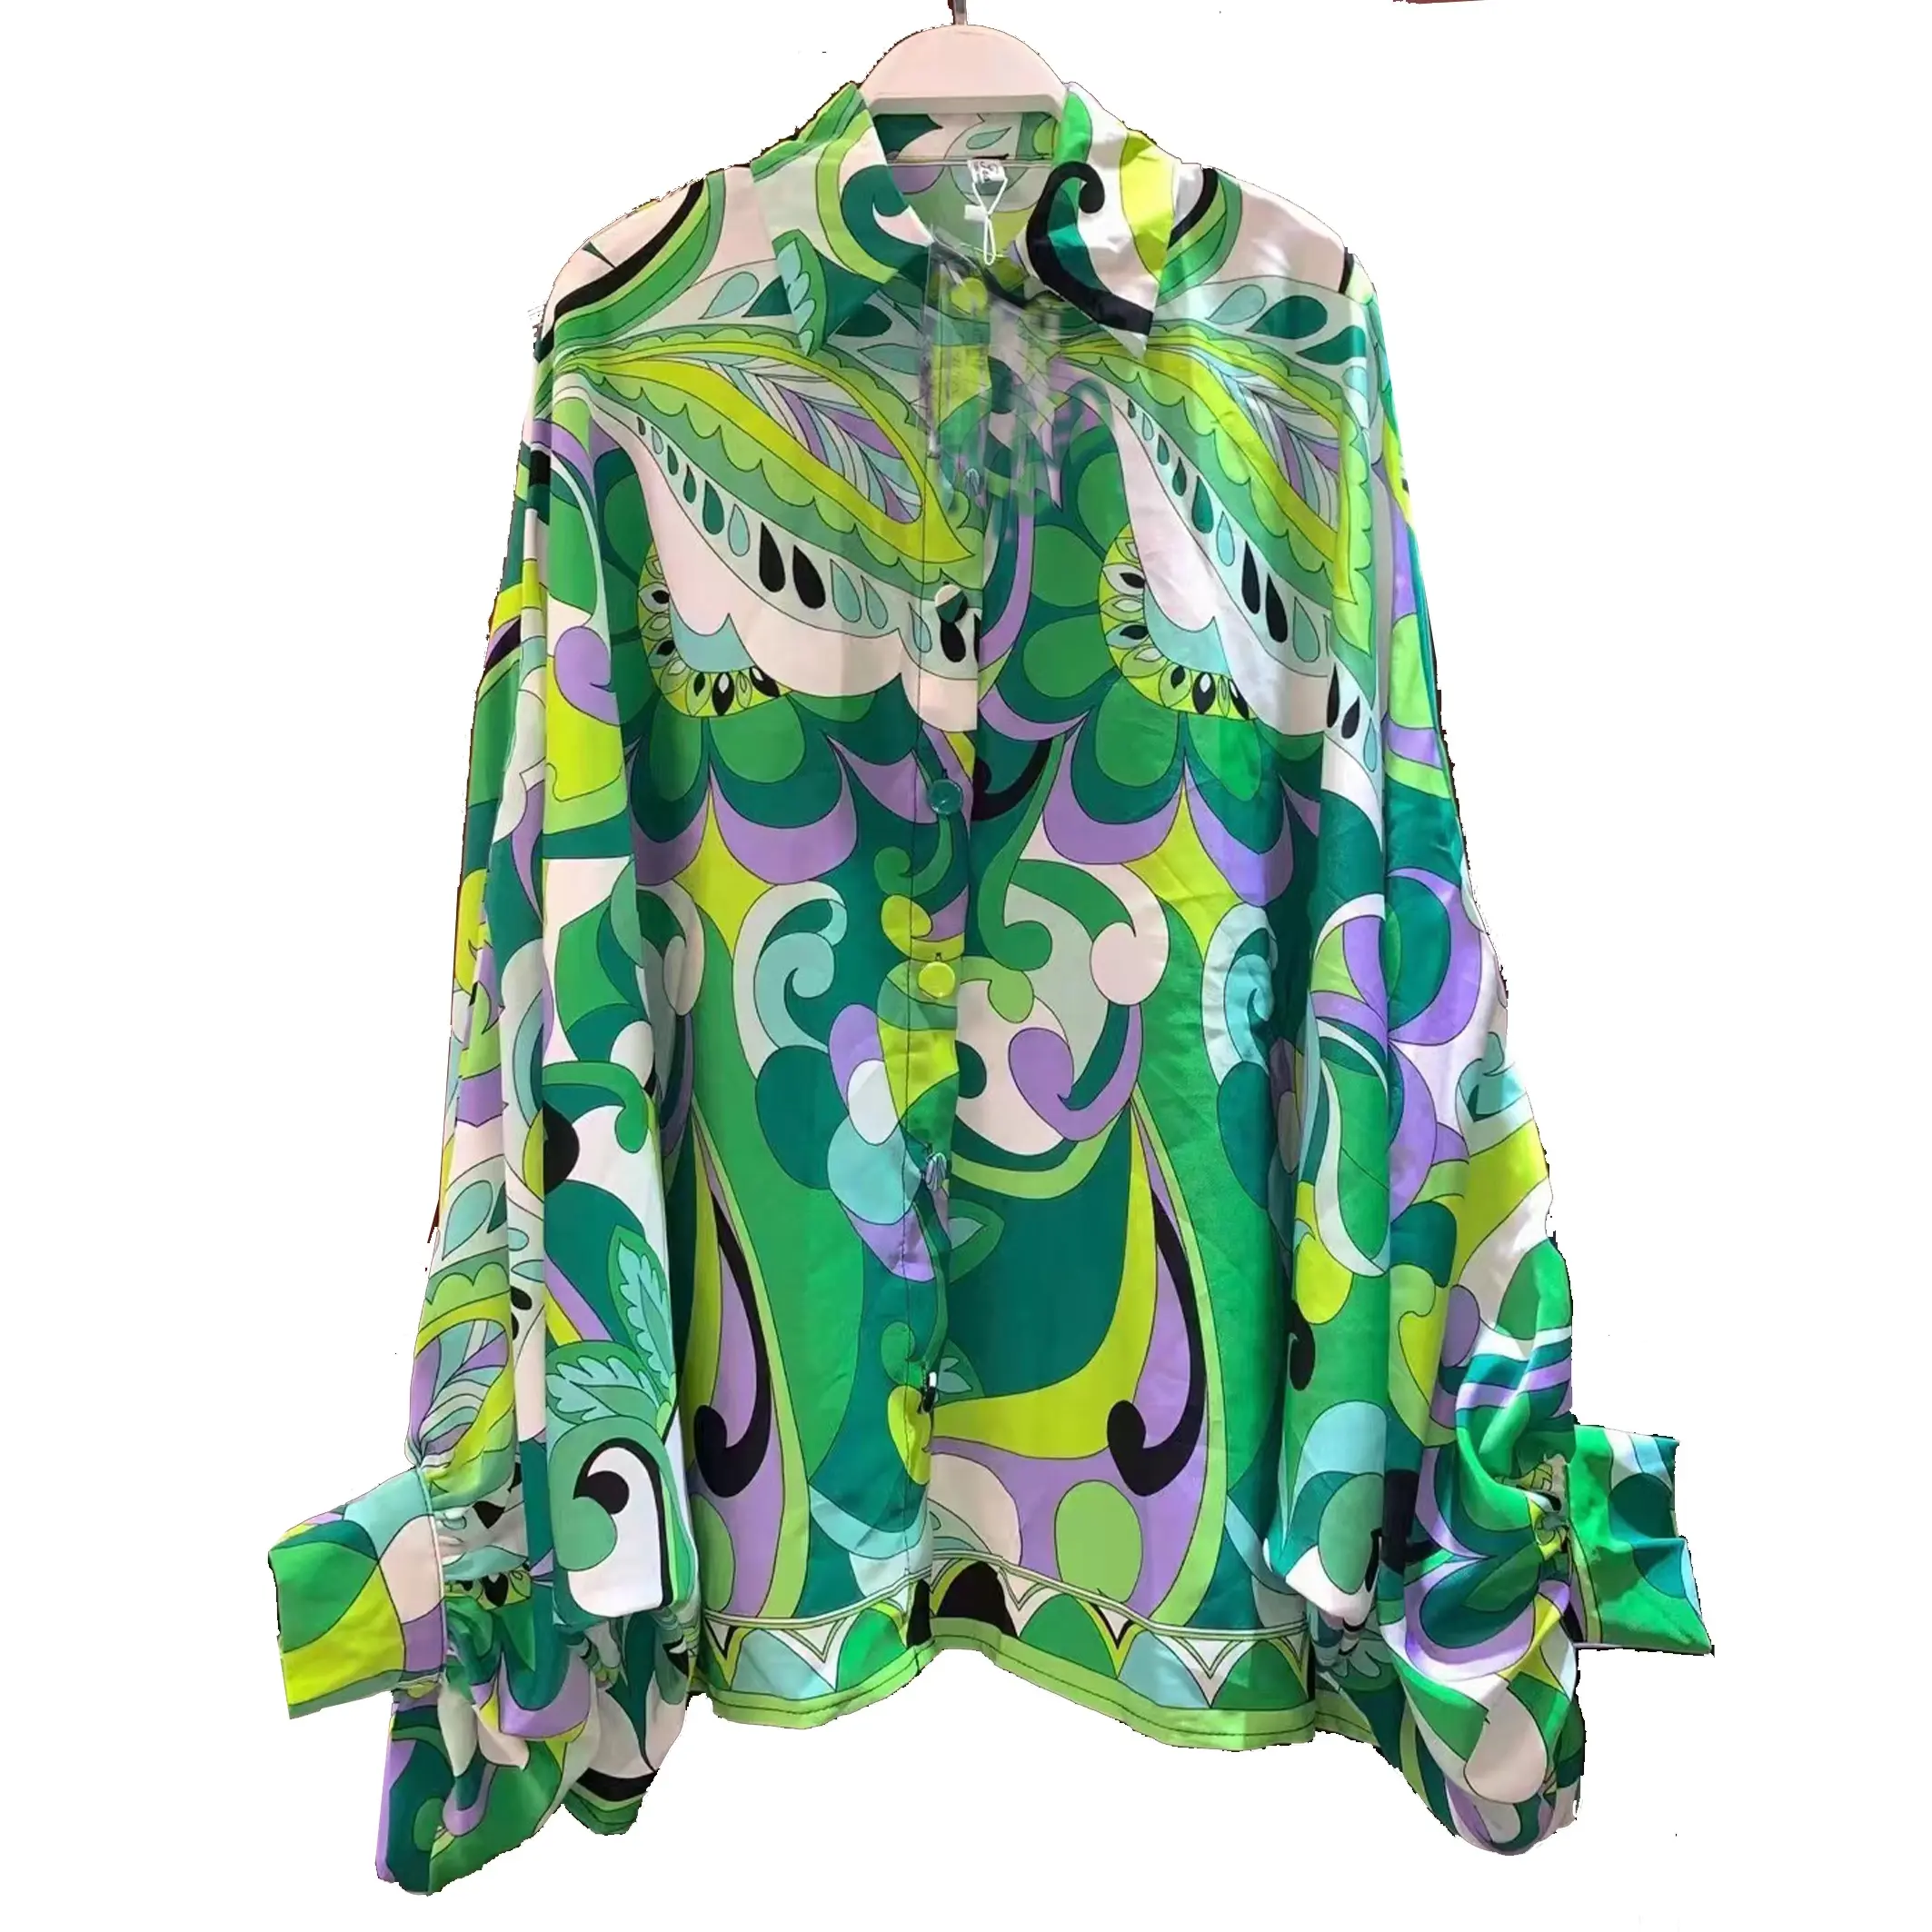 New Arrivals Luxury Women Fashion Batwing Sleeve Elegant Shirts Printed Blouses And Tops